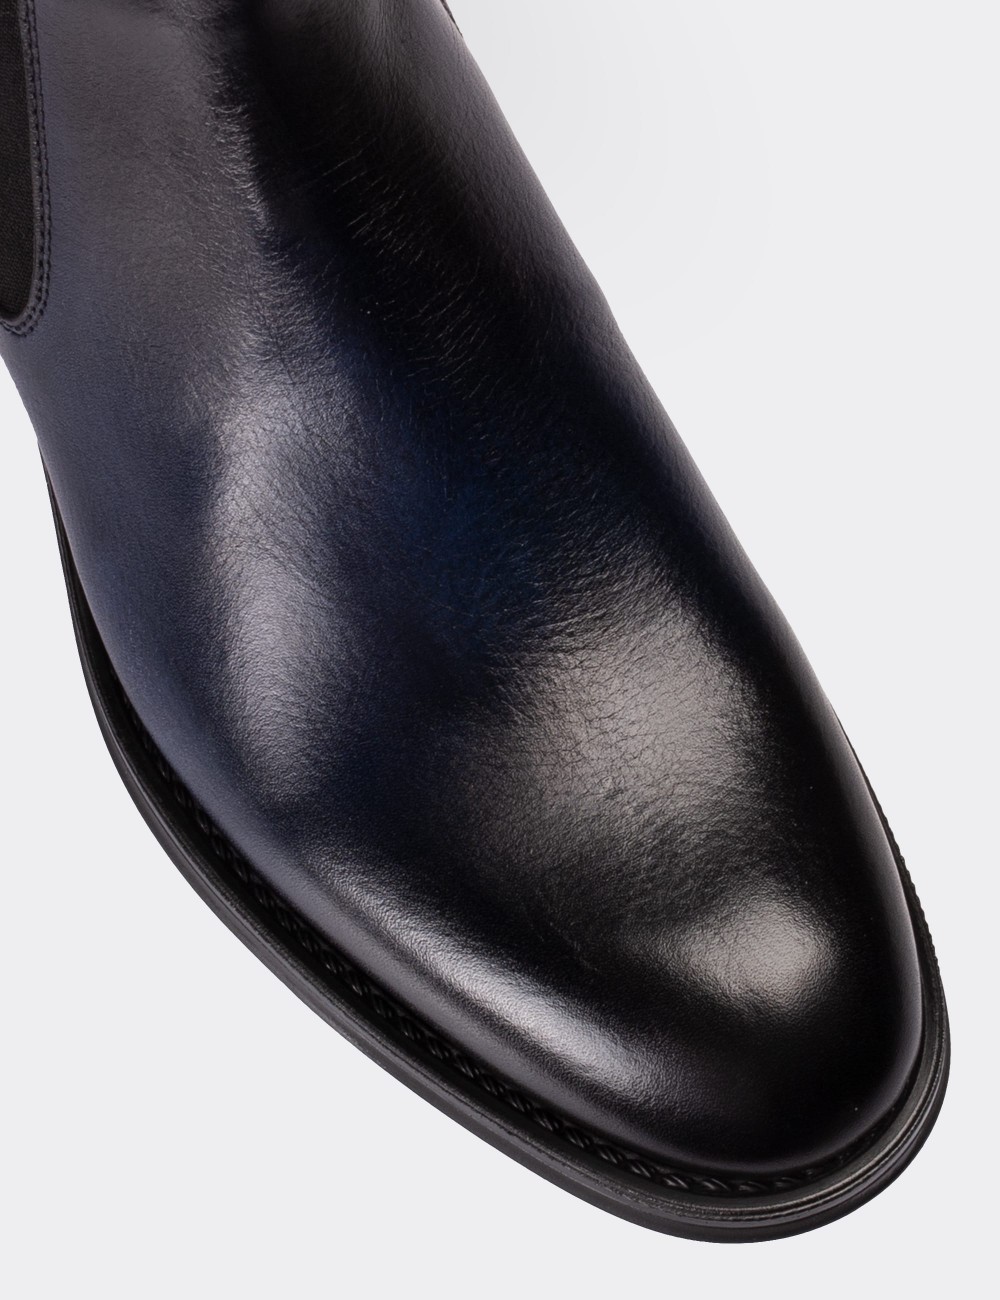 Navy  Leather Chelsea Boots - 01620MMVIC02